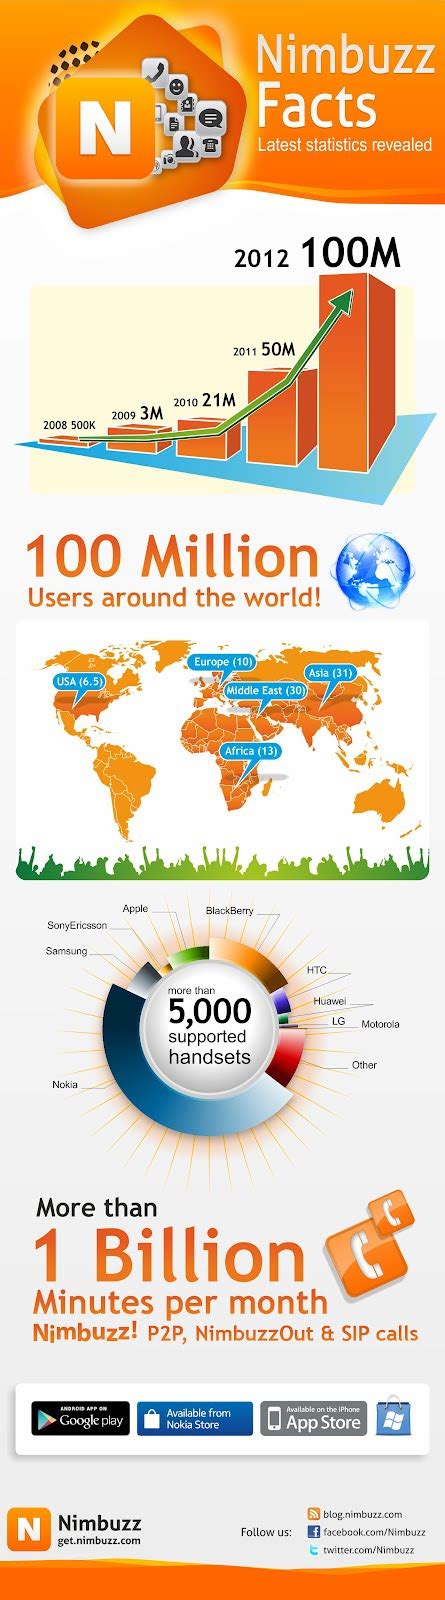 Nimbuzz hits 100 million users, shares cool infographic | Infographic, Infographic creator, Web ...